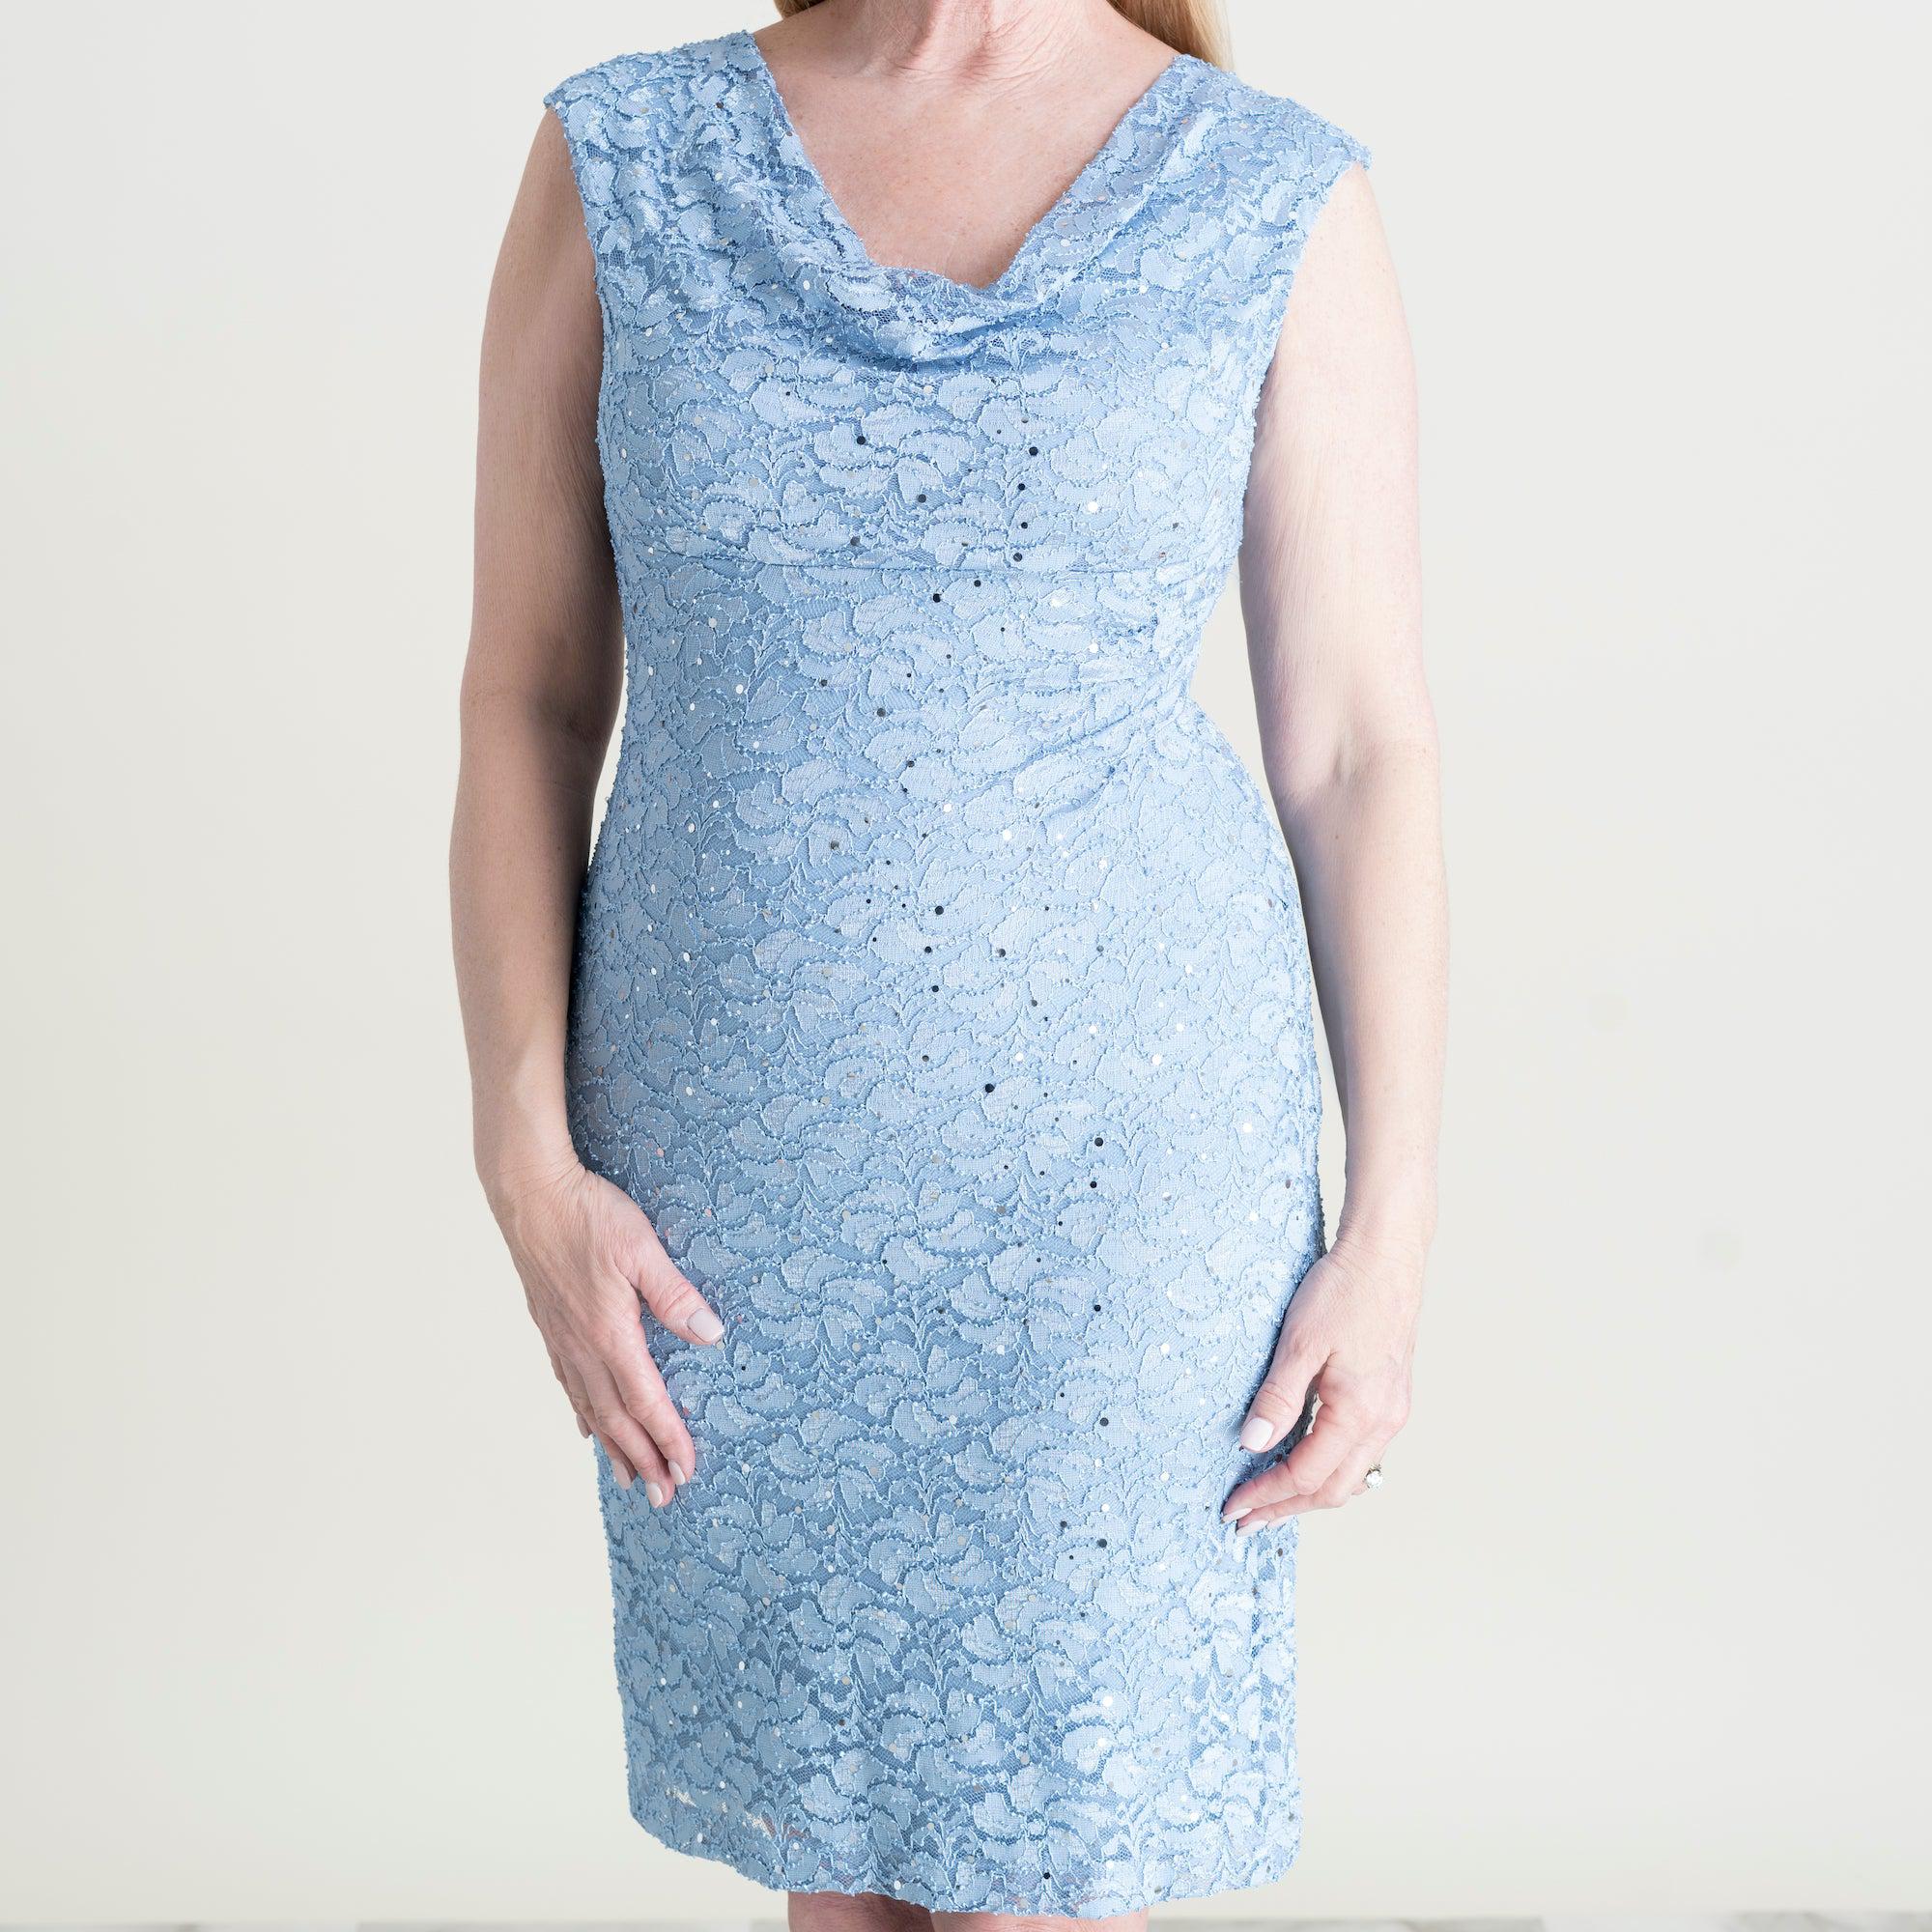 Woman posing wearing Sky Tina Sky Blue Sequin Lace Cocktail Dress from Connected Apparel